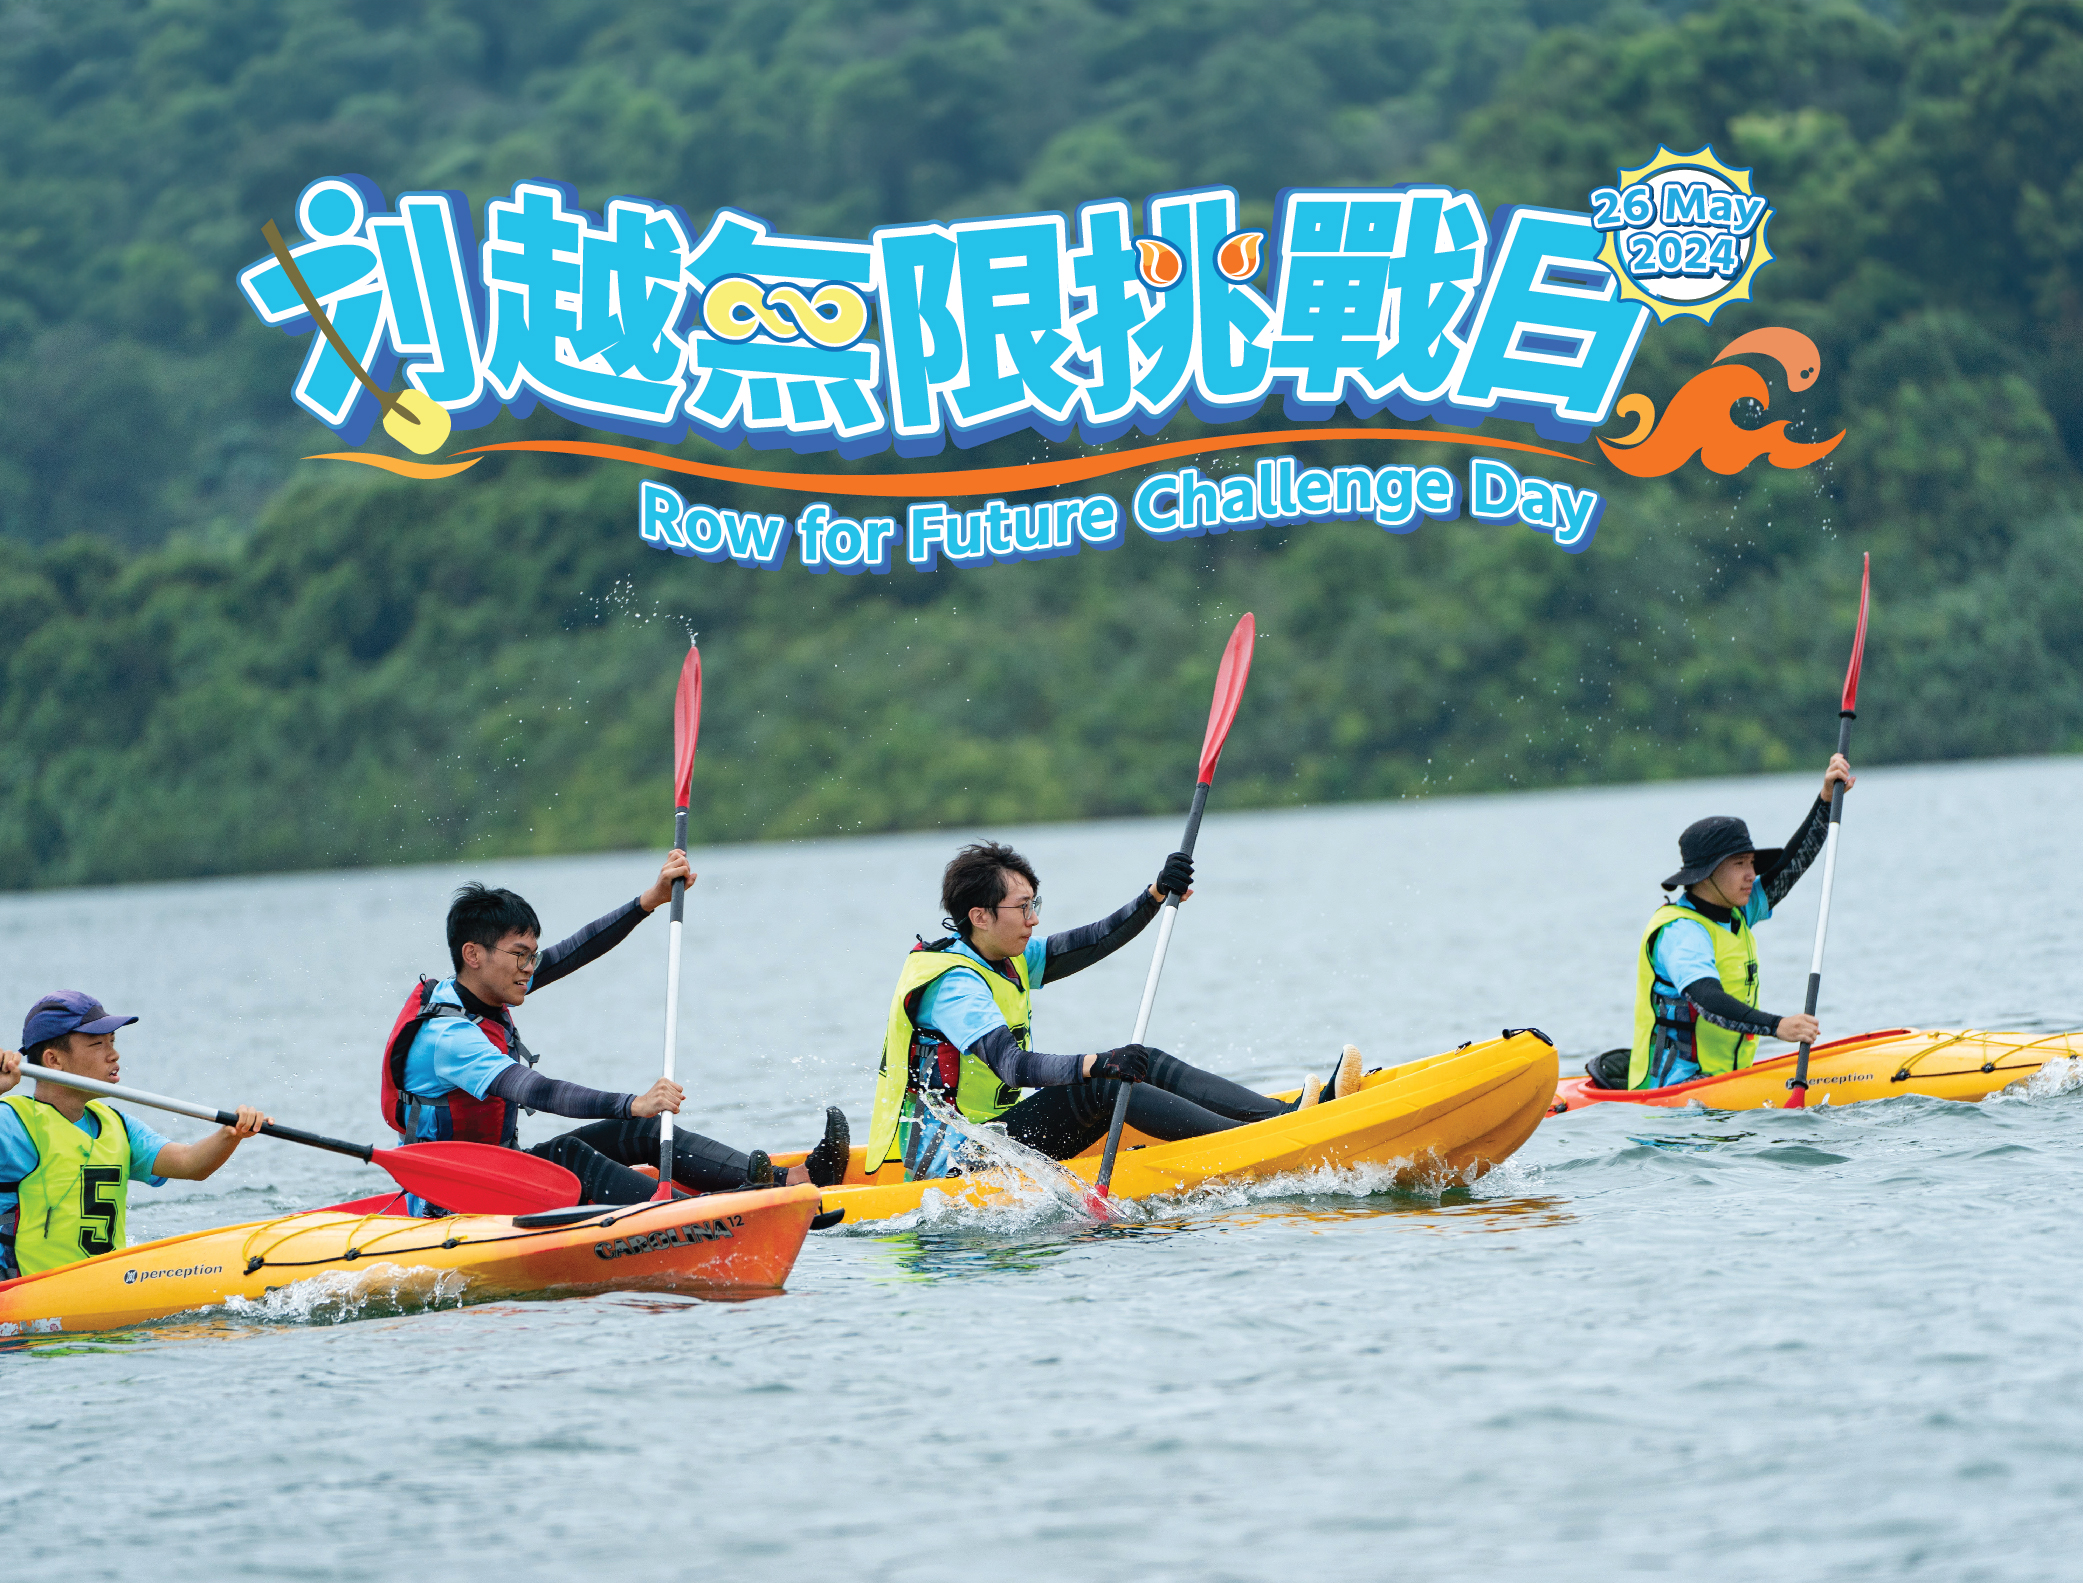 May 2024: Row for Future Challenge Day was held successfully on May 26